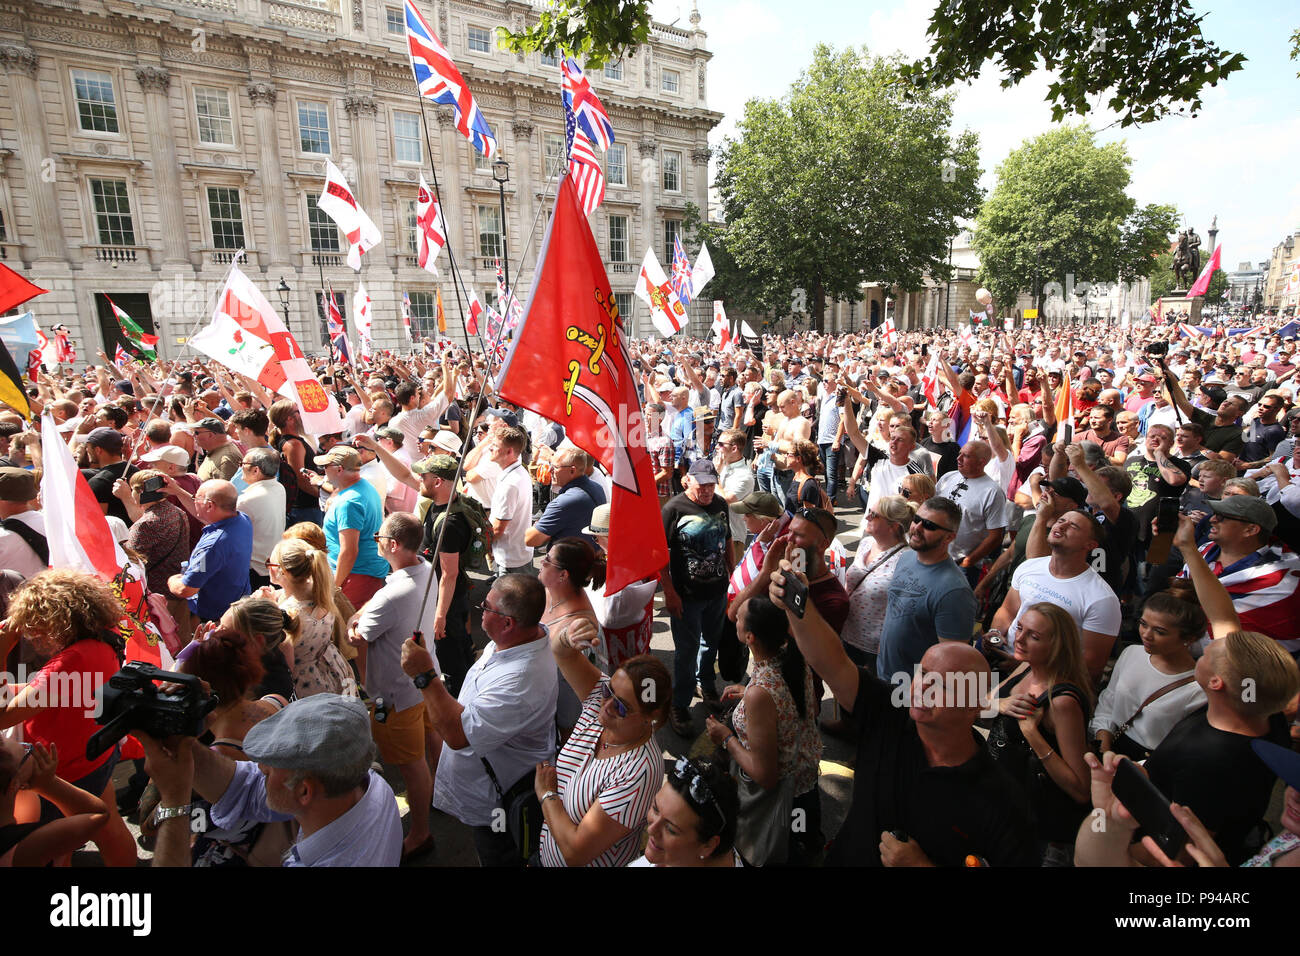 Free Tommy Robinson supporters and Pro-Trump supporters come together on Whitehall, London for a joint rally in support of the visit of the US President to the UK and calling for the release of jailed Tommy Robinson. Stock Photo